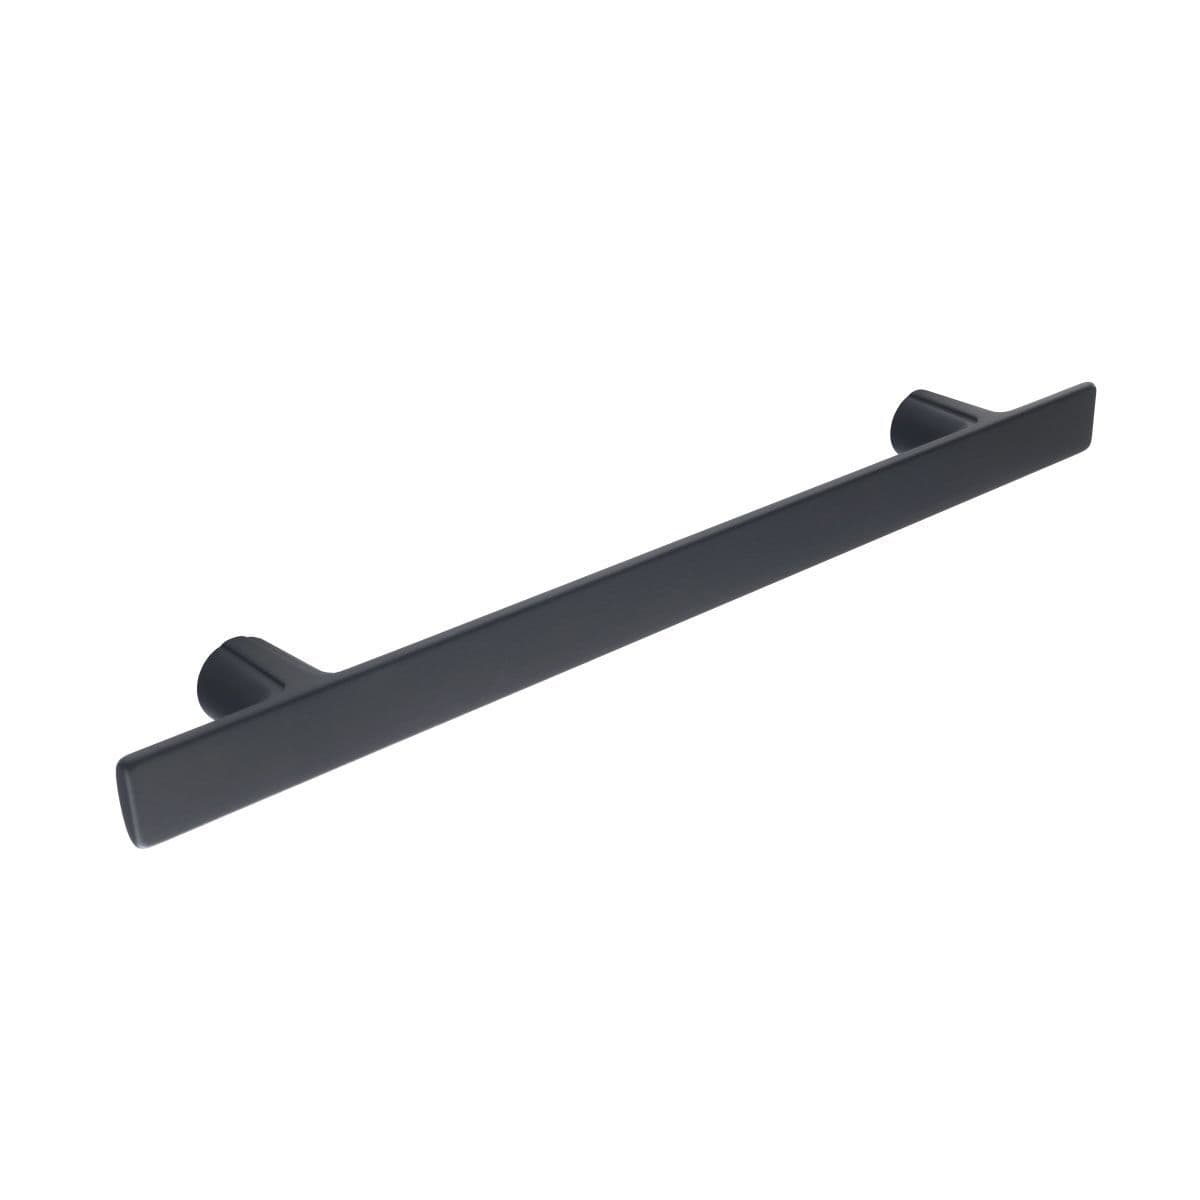 HOVE T BAR Cupboard Handle - 2 sizes - 2 finishes (PWS H1130.160 / H1130.320)